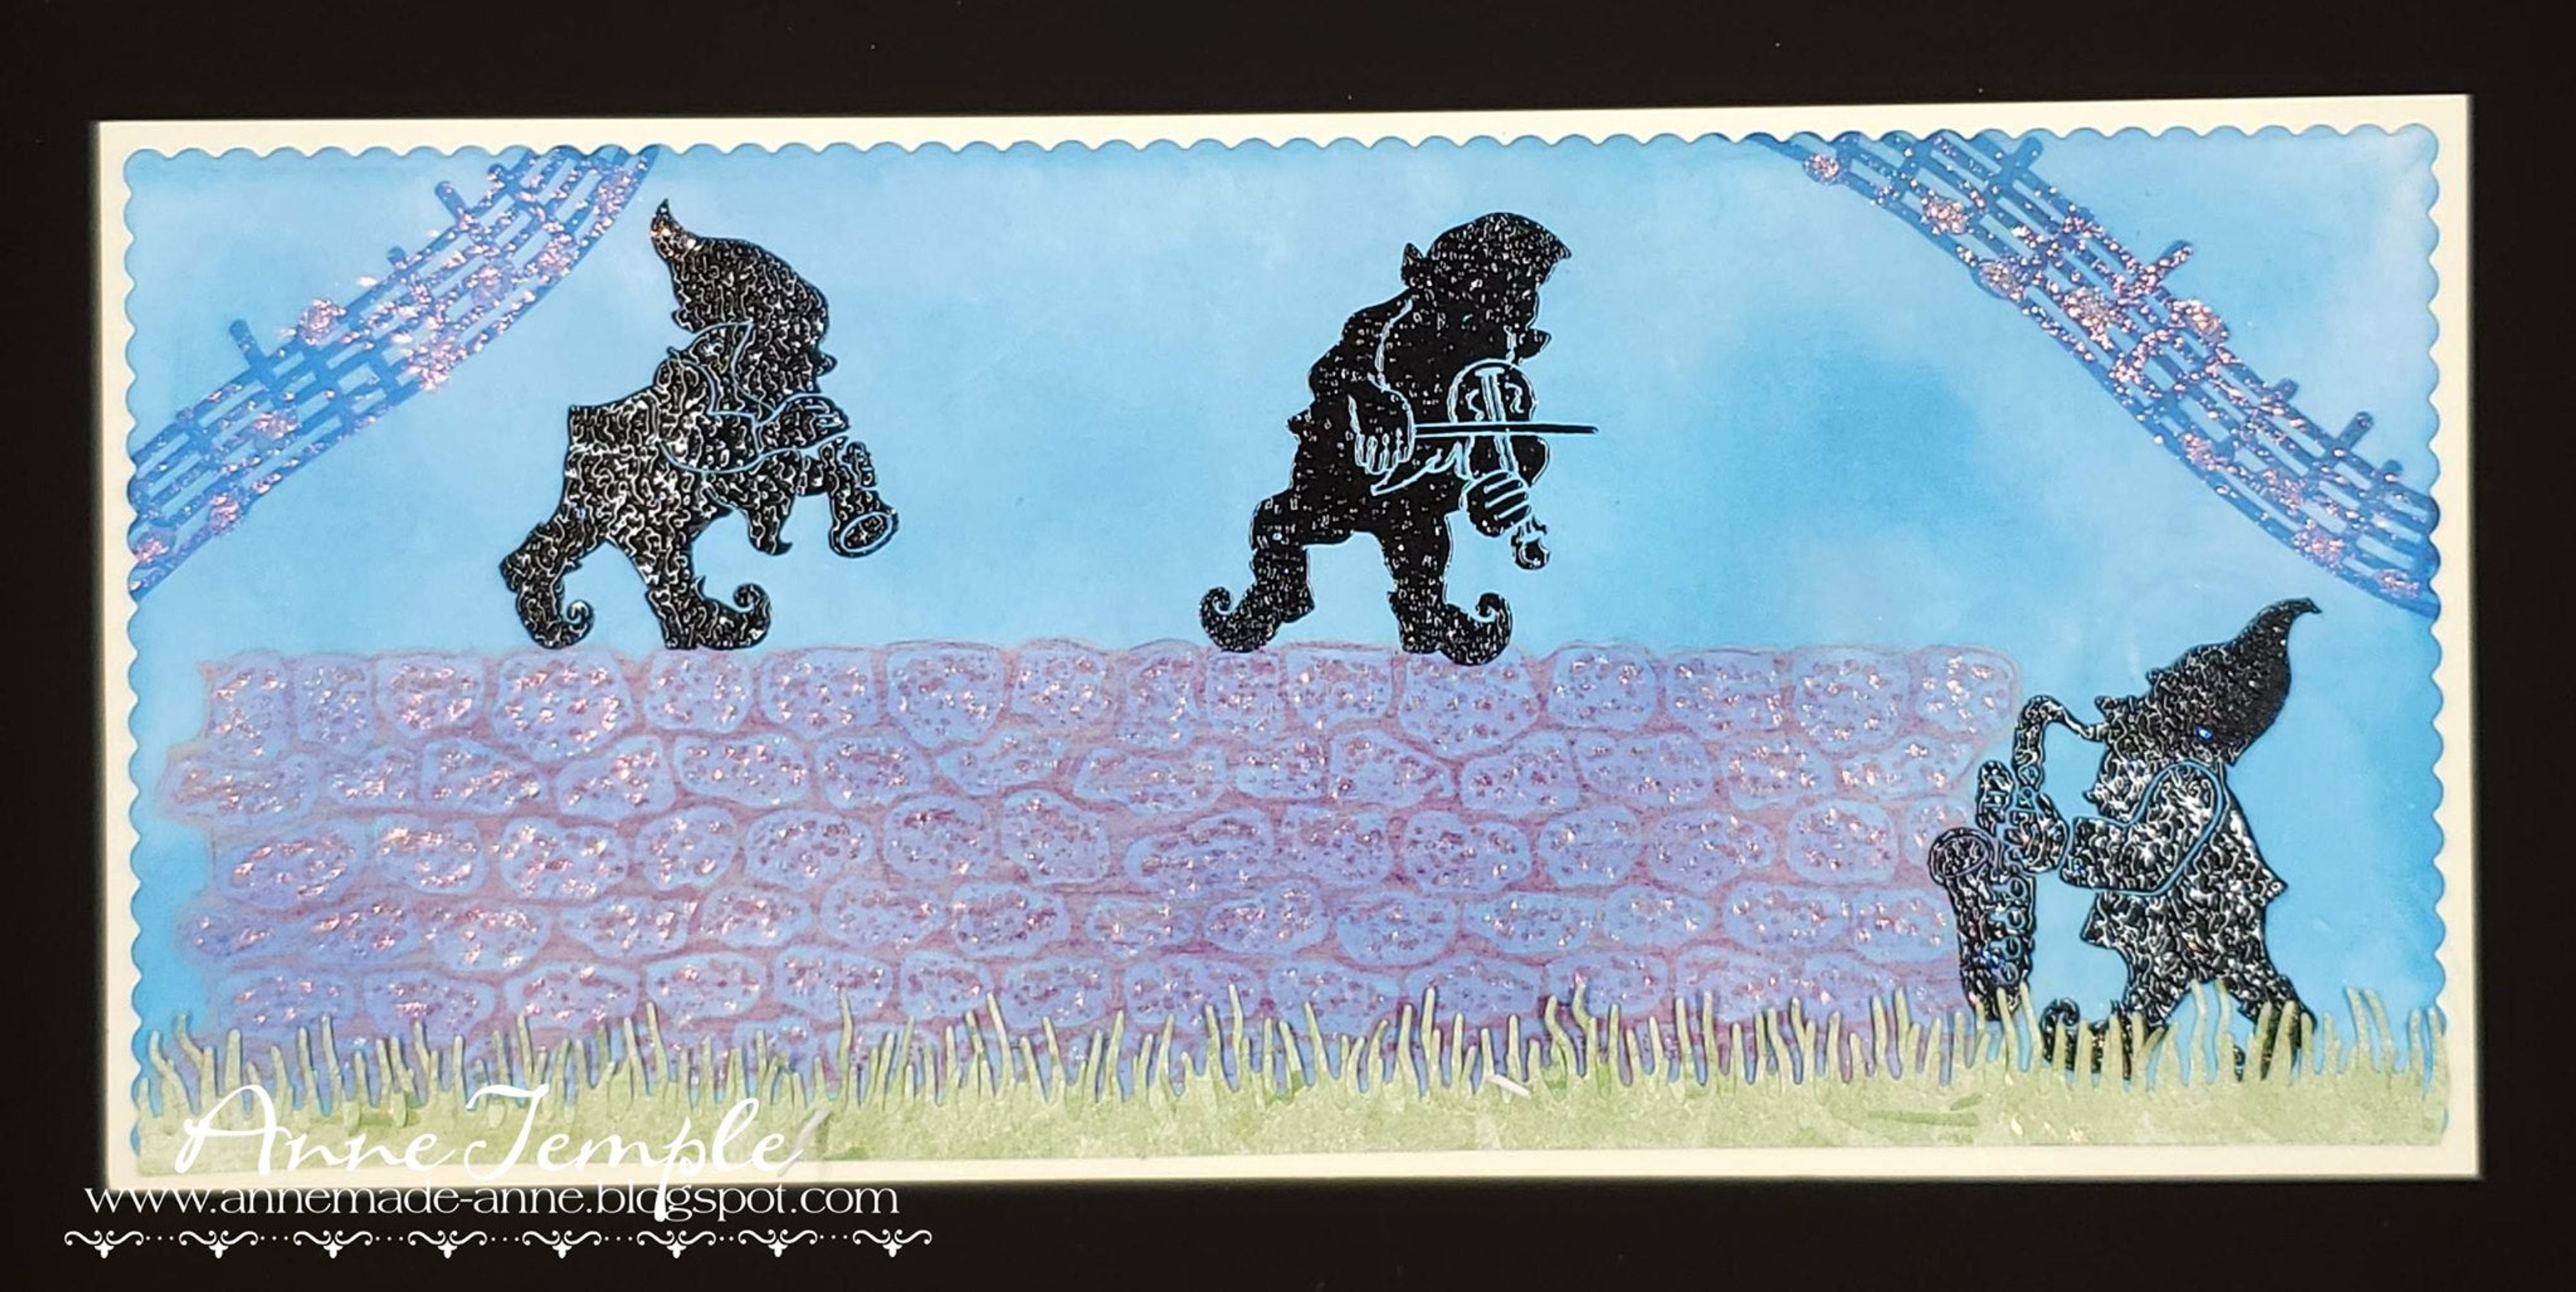 Fairy Hugs Stamps - Stone Wall